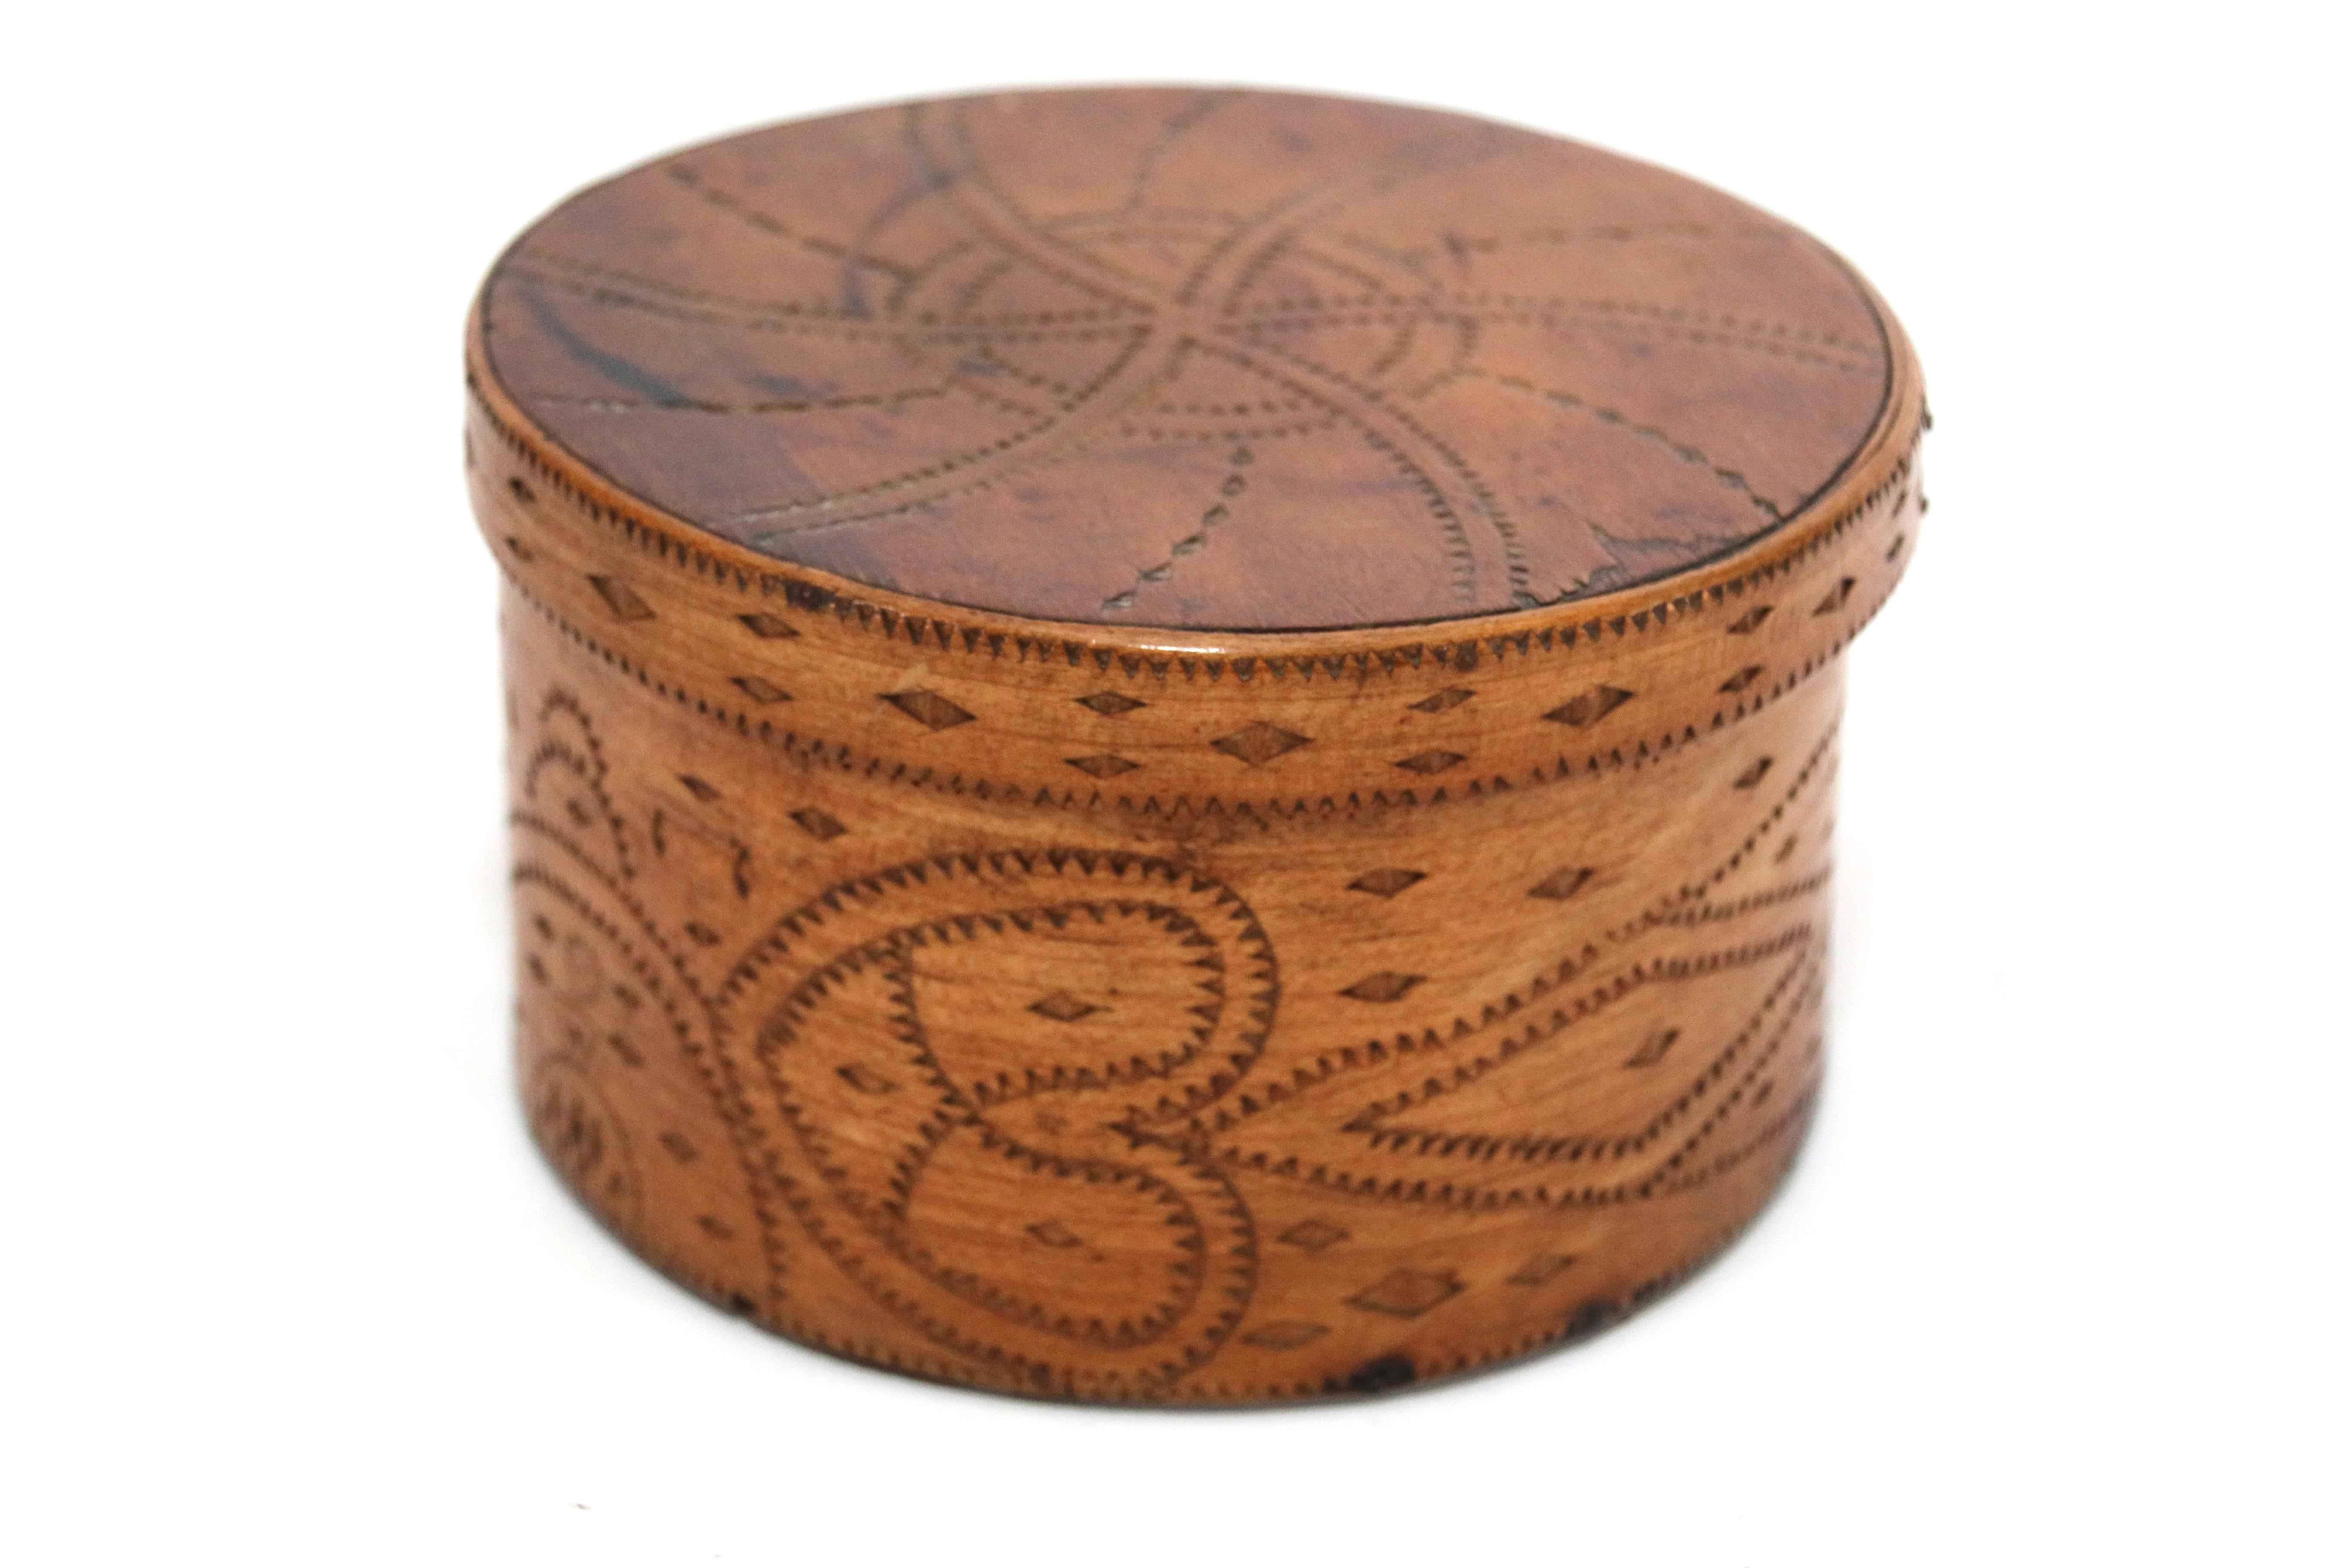 Early 19th century Folk Art bentwood box with diamond incised designs of hearts, diamonds and a pinwheel cover, initialled 